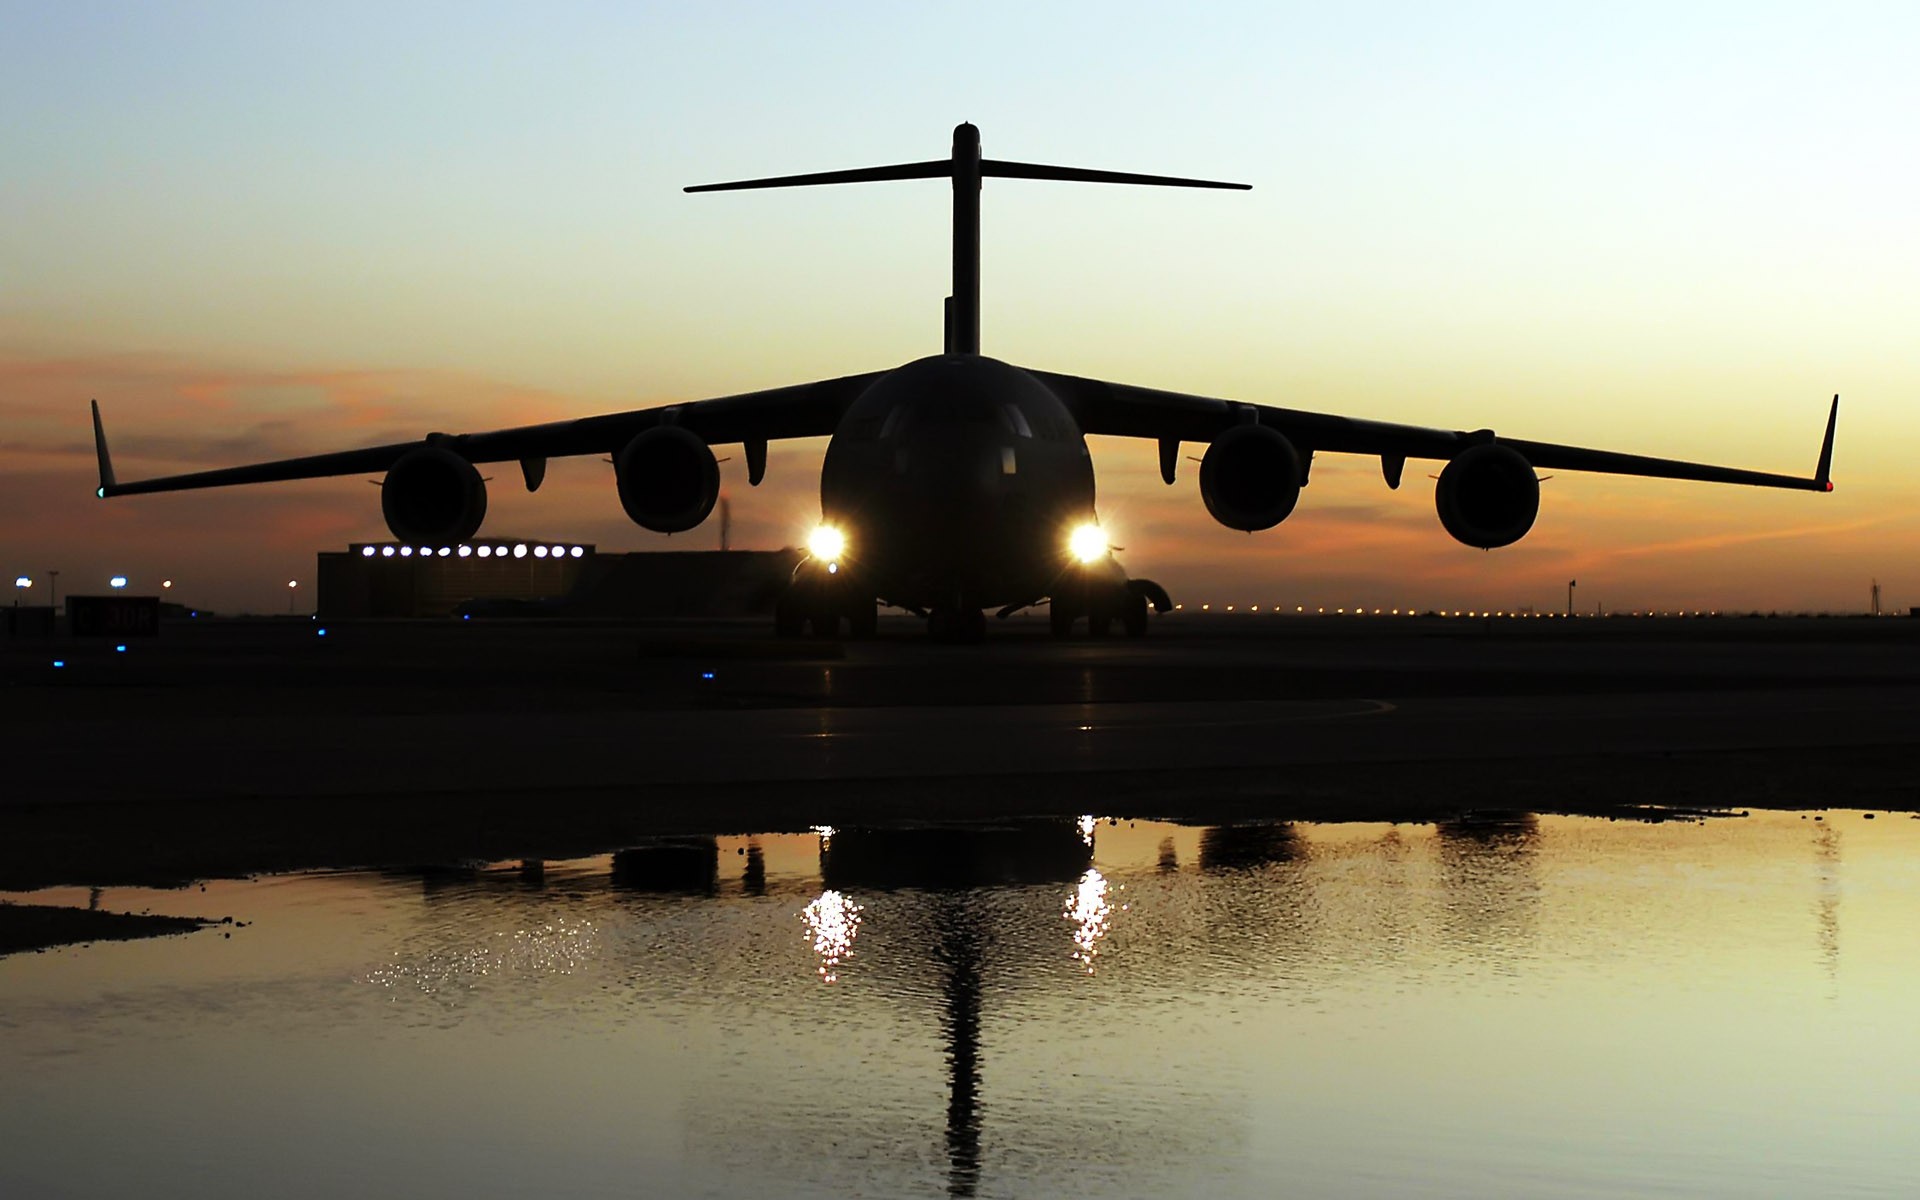 General 1920x1200 airplane Boeing C-17 Globemaster III military aircraft dusk cargo sunset aircraft runway transport frontal view vehicle military vehicle military American aircraft